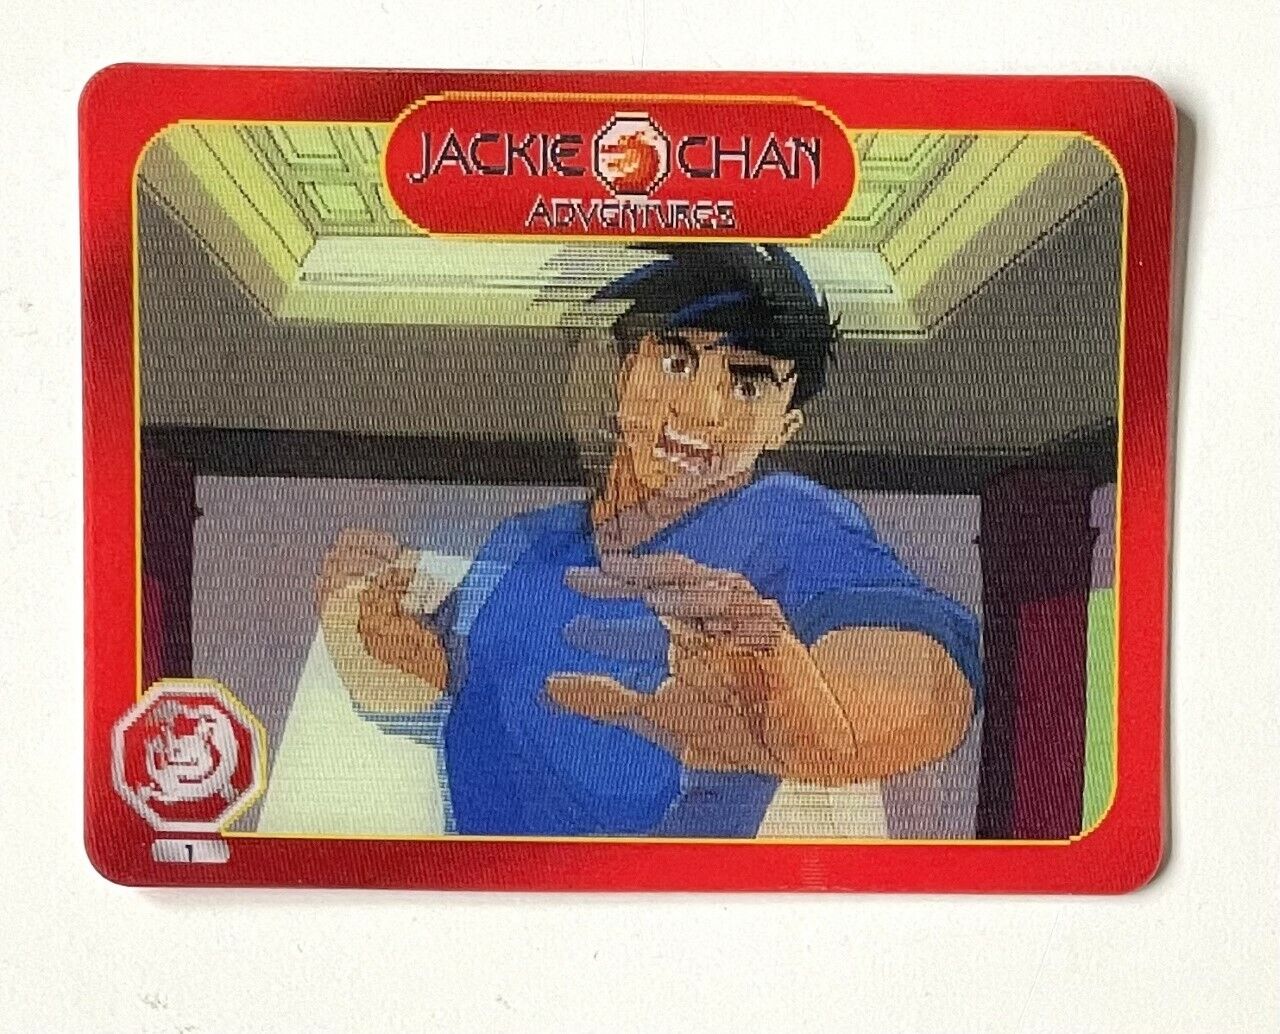 2003 Jackie Chan Adventures Cards - SPECIAL CARDS - Rare - Holo - Talismans - NM